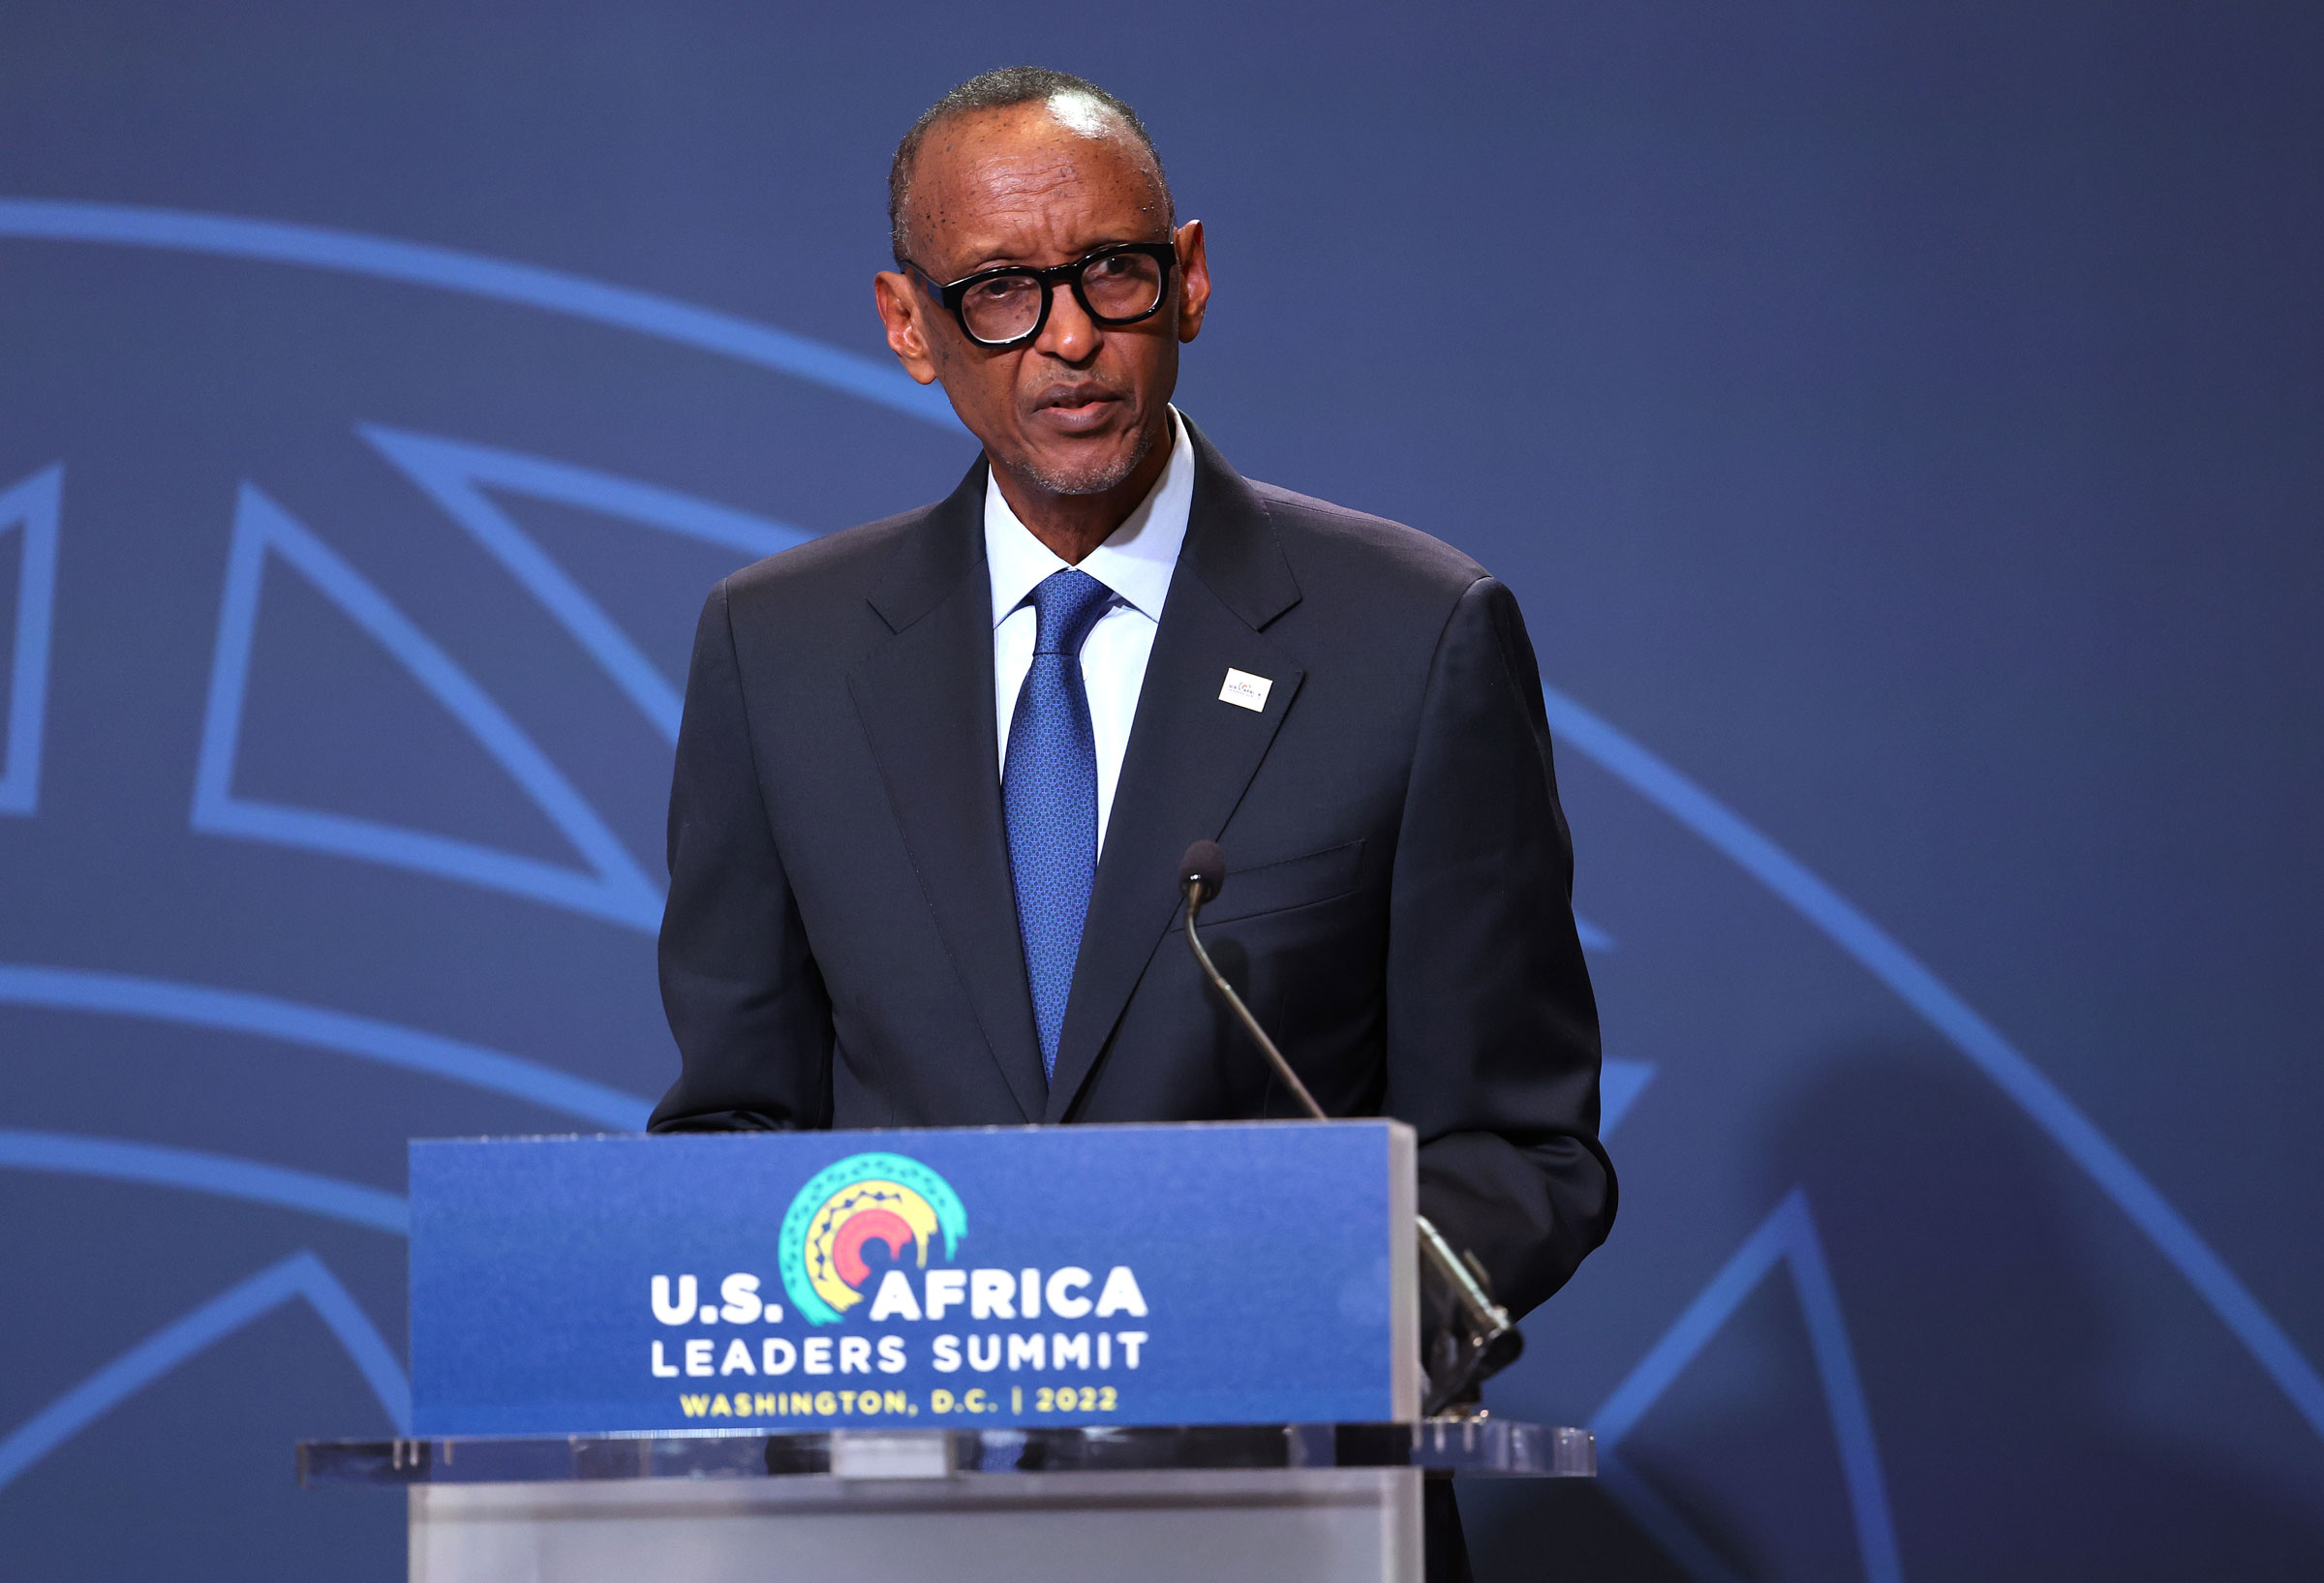 President of Rwanda Paul Kagame delivers remarks during the Space Forum at the U.S. - Africa Leaders Summit in Washington, D.C., on December 13, 2022. (Kevin Dietsch—Getty Images)